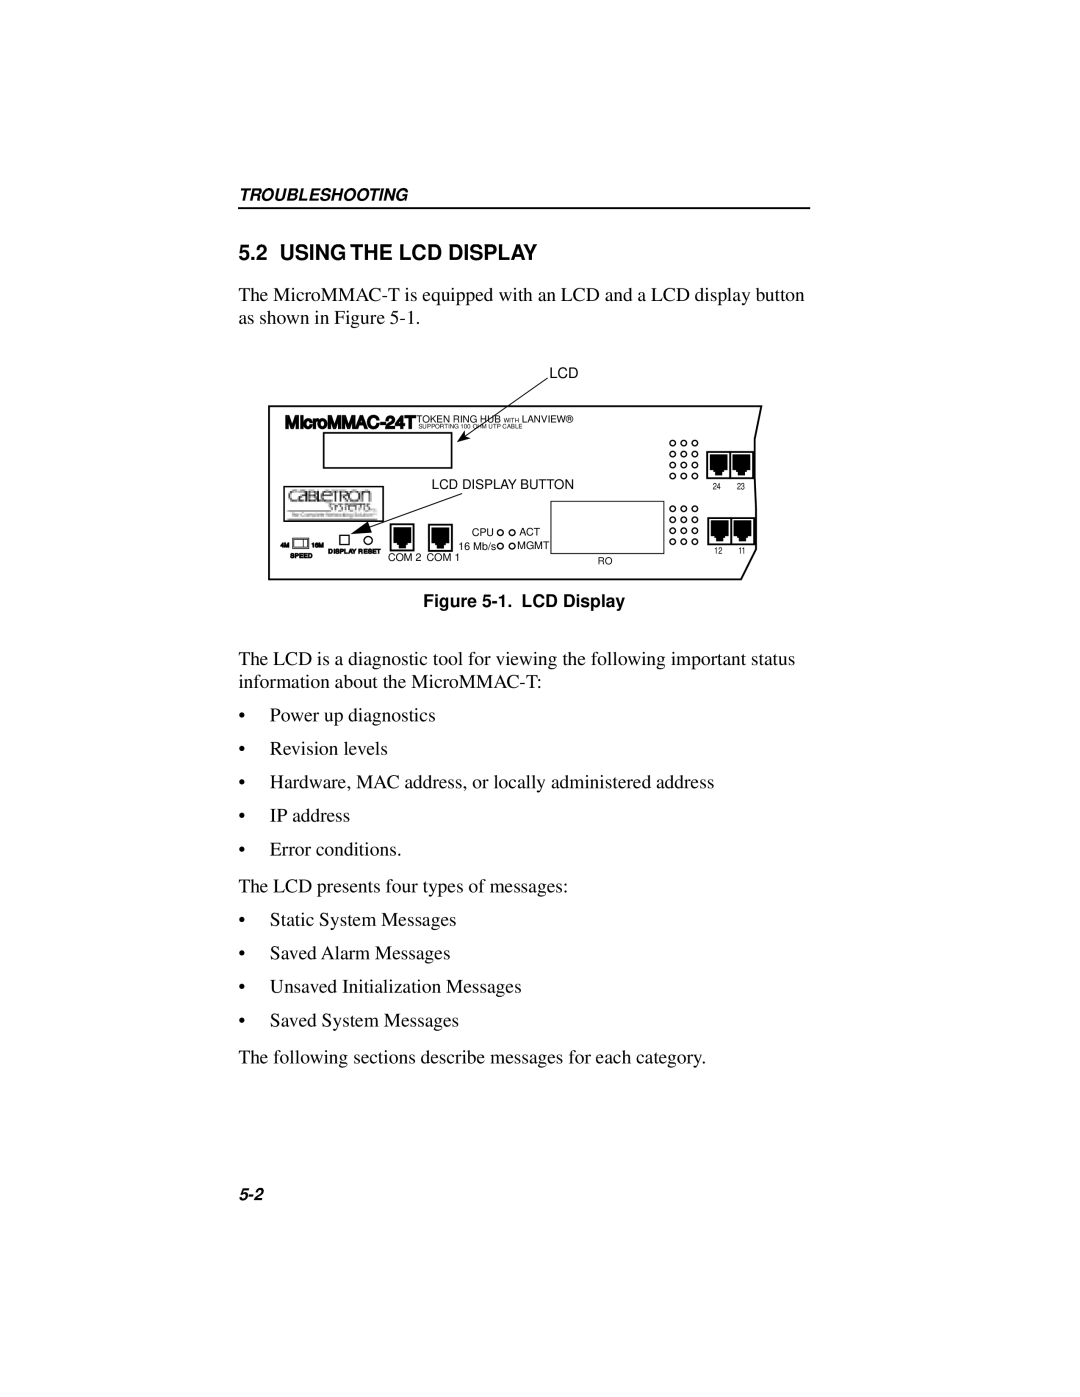 Cabletron Systems 42T, MICROMMAC-22T manual Using The Lcd Display 